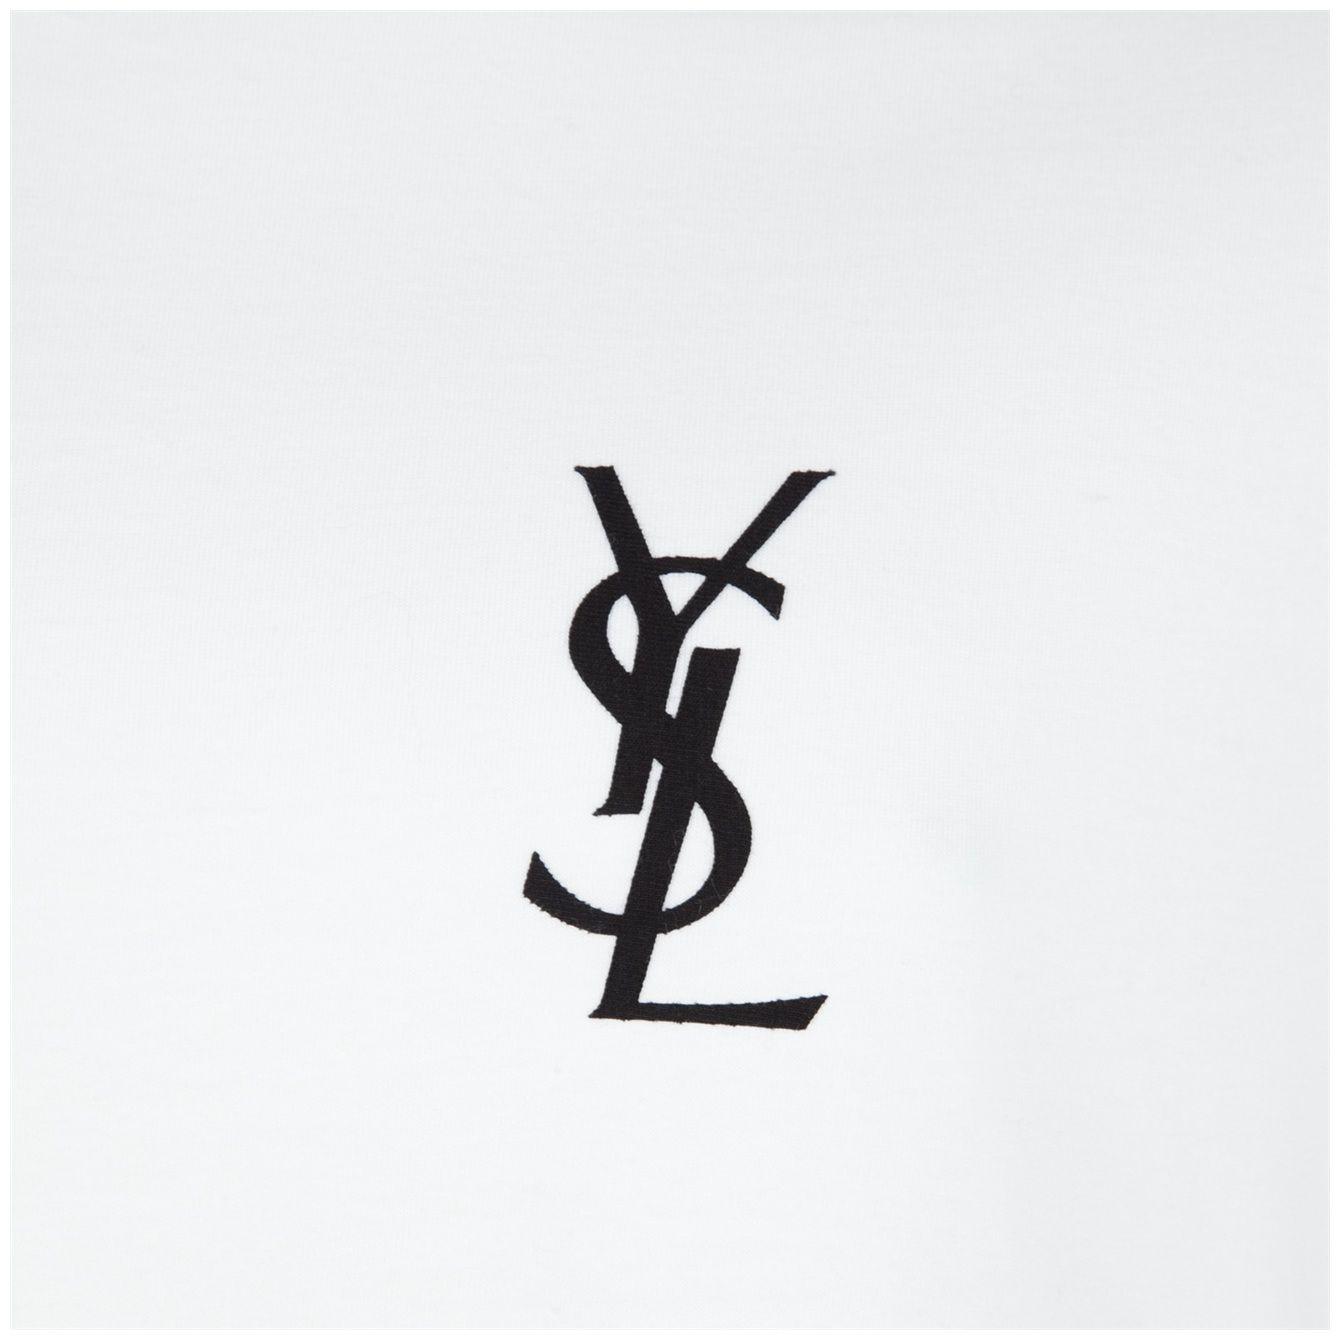 Ysl Bw Tote Bag by Mary Pille - Pixels